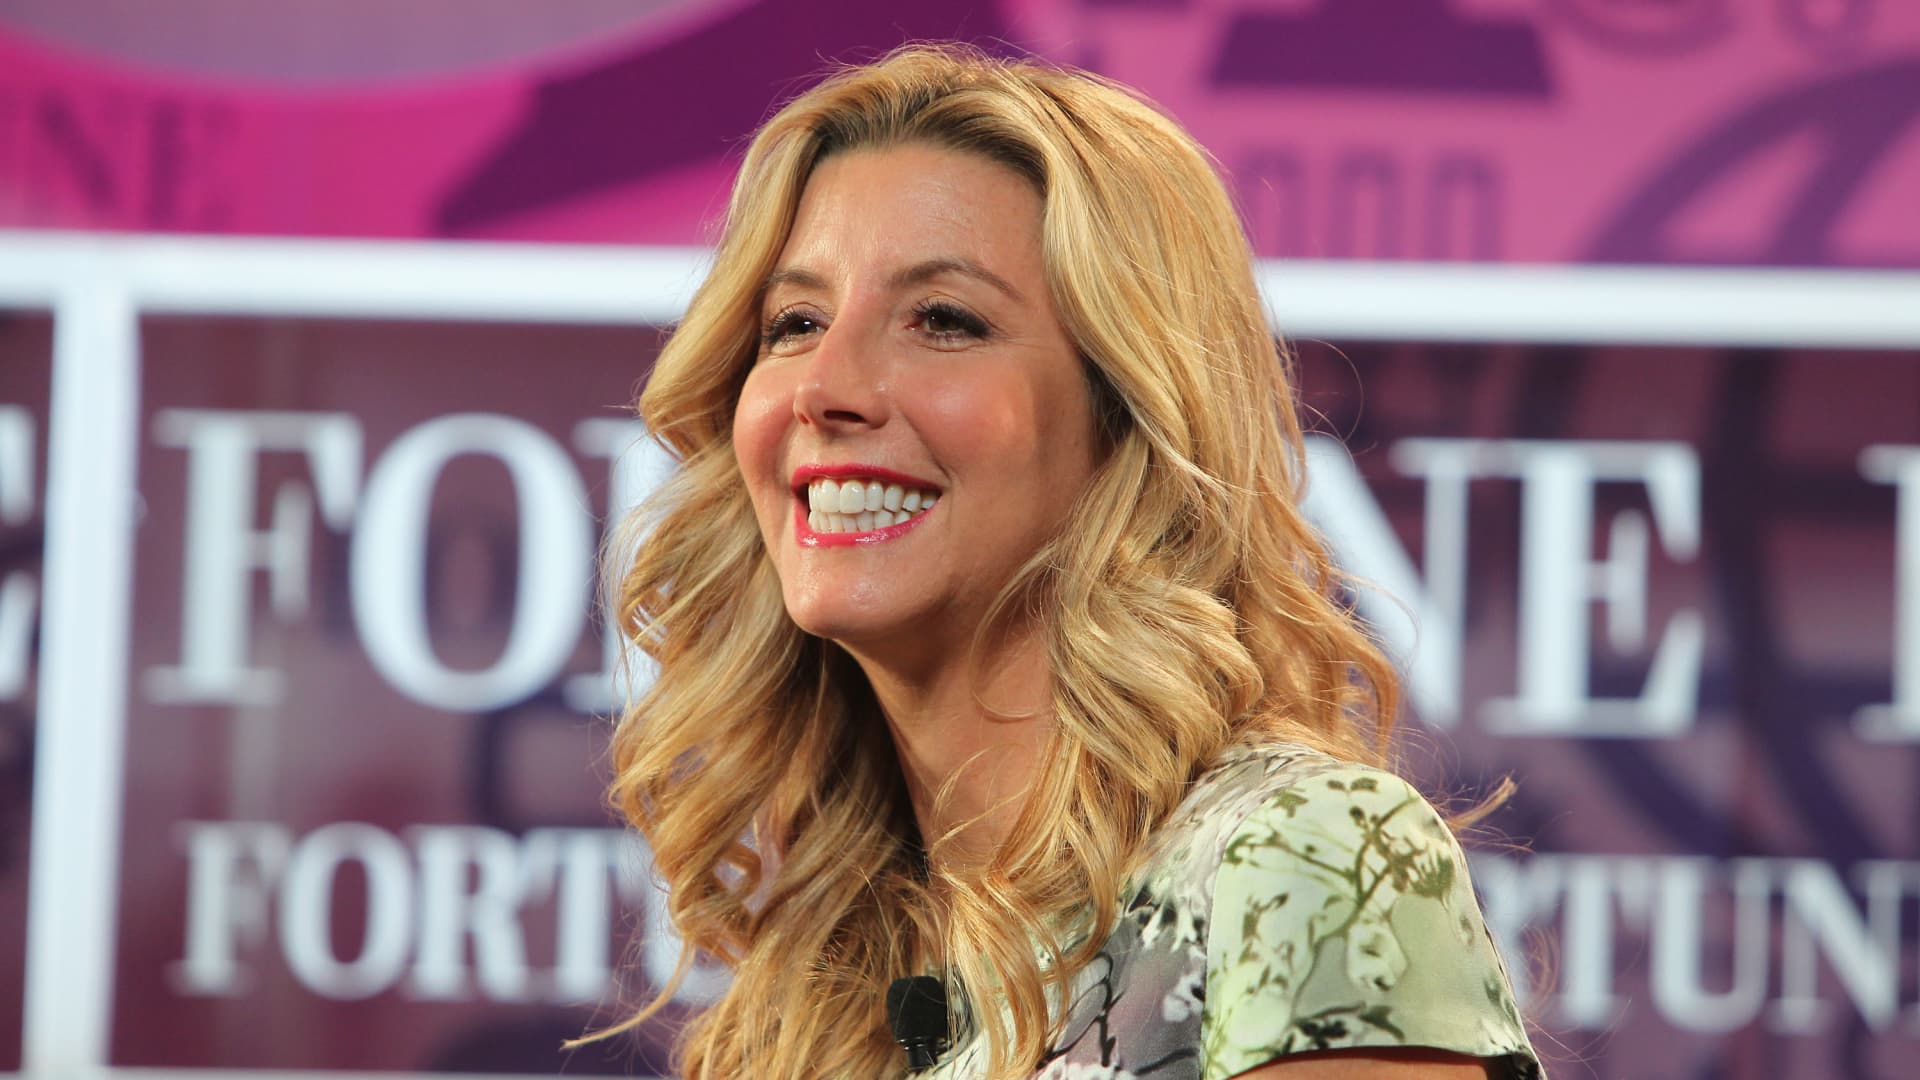 Spanx founder Sara Blakely's mother on raising a successful CEO